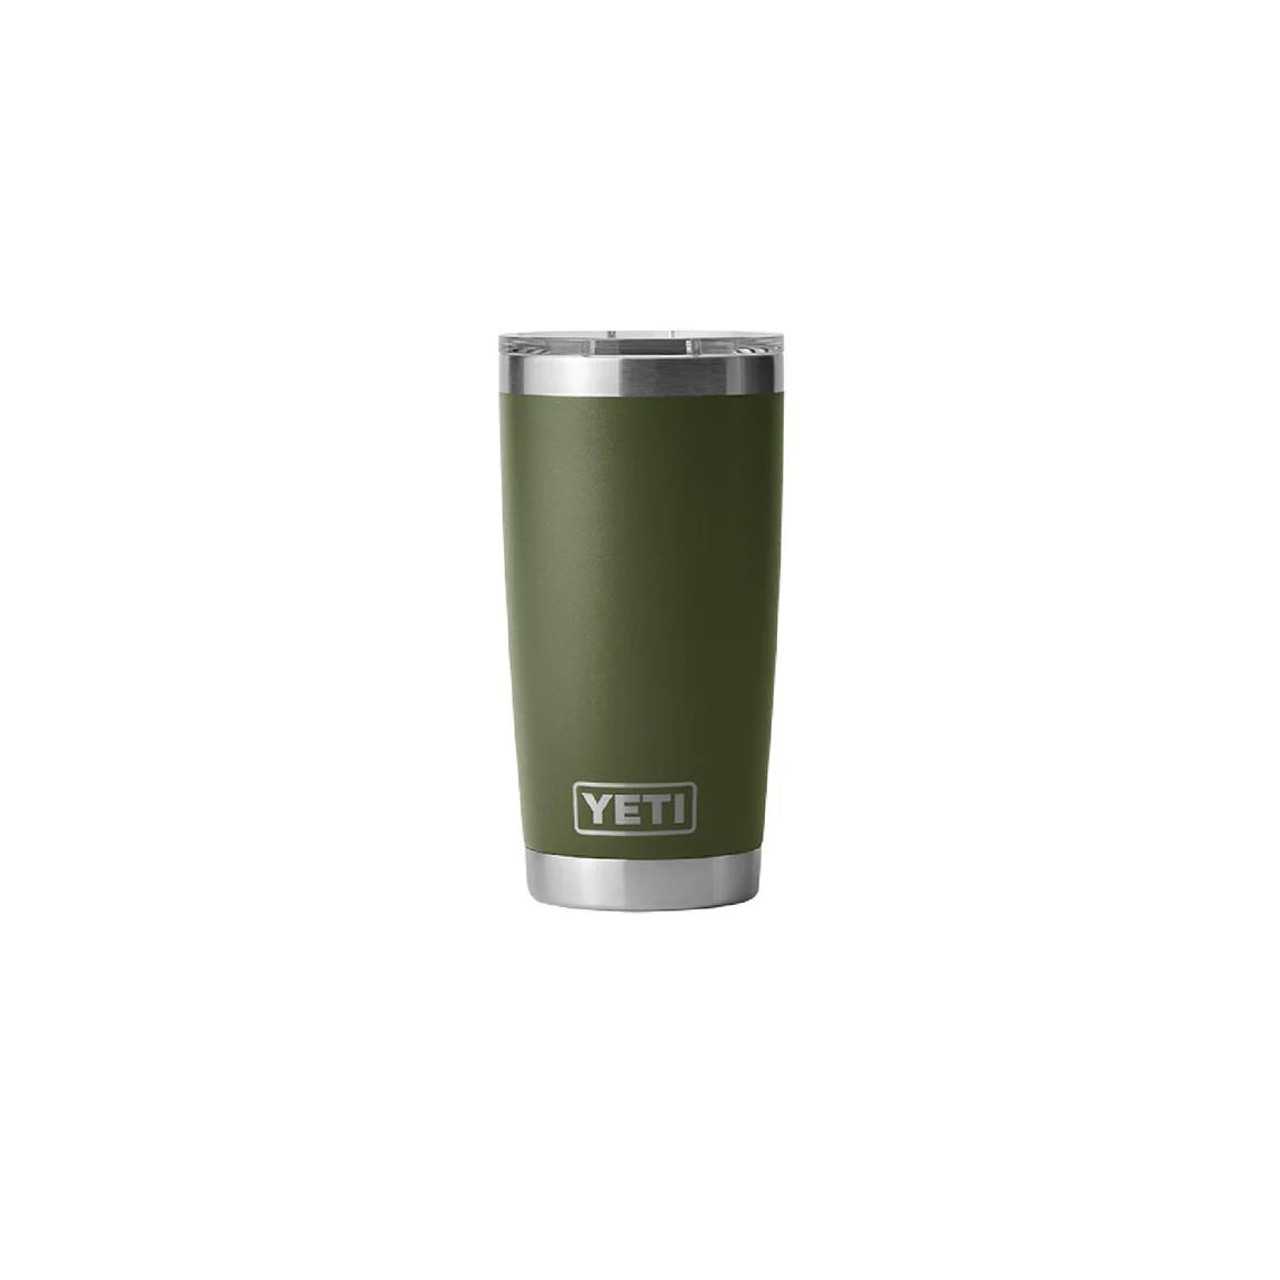 https://cdn11.bigcommerce.com/s-stfpjhht/images/stencil/1280x1280/products/23297/43093/Yeti-Rambler-20-Oz-Tumbler-With-Magslider-Lid-Highlands-Olive-21071500703-888830130476_image1__25607.1628632134.jpg?c=2